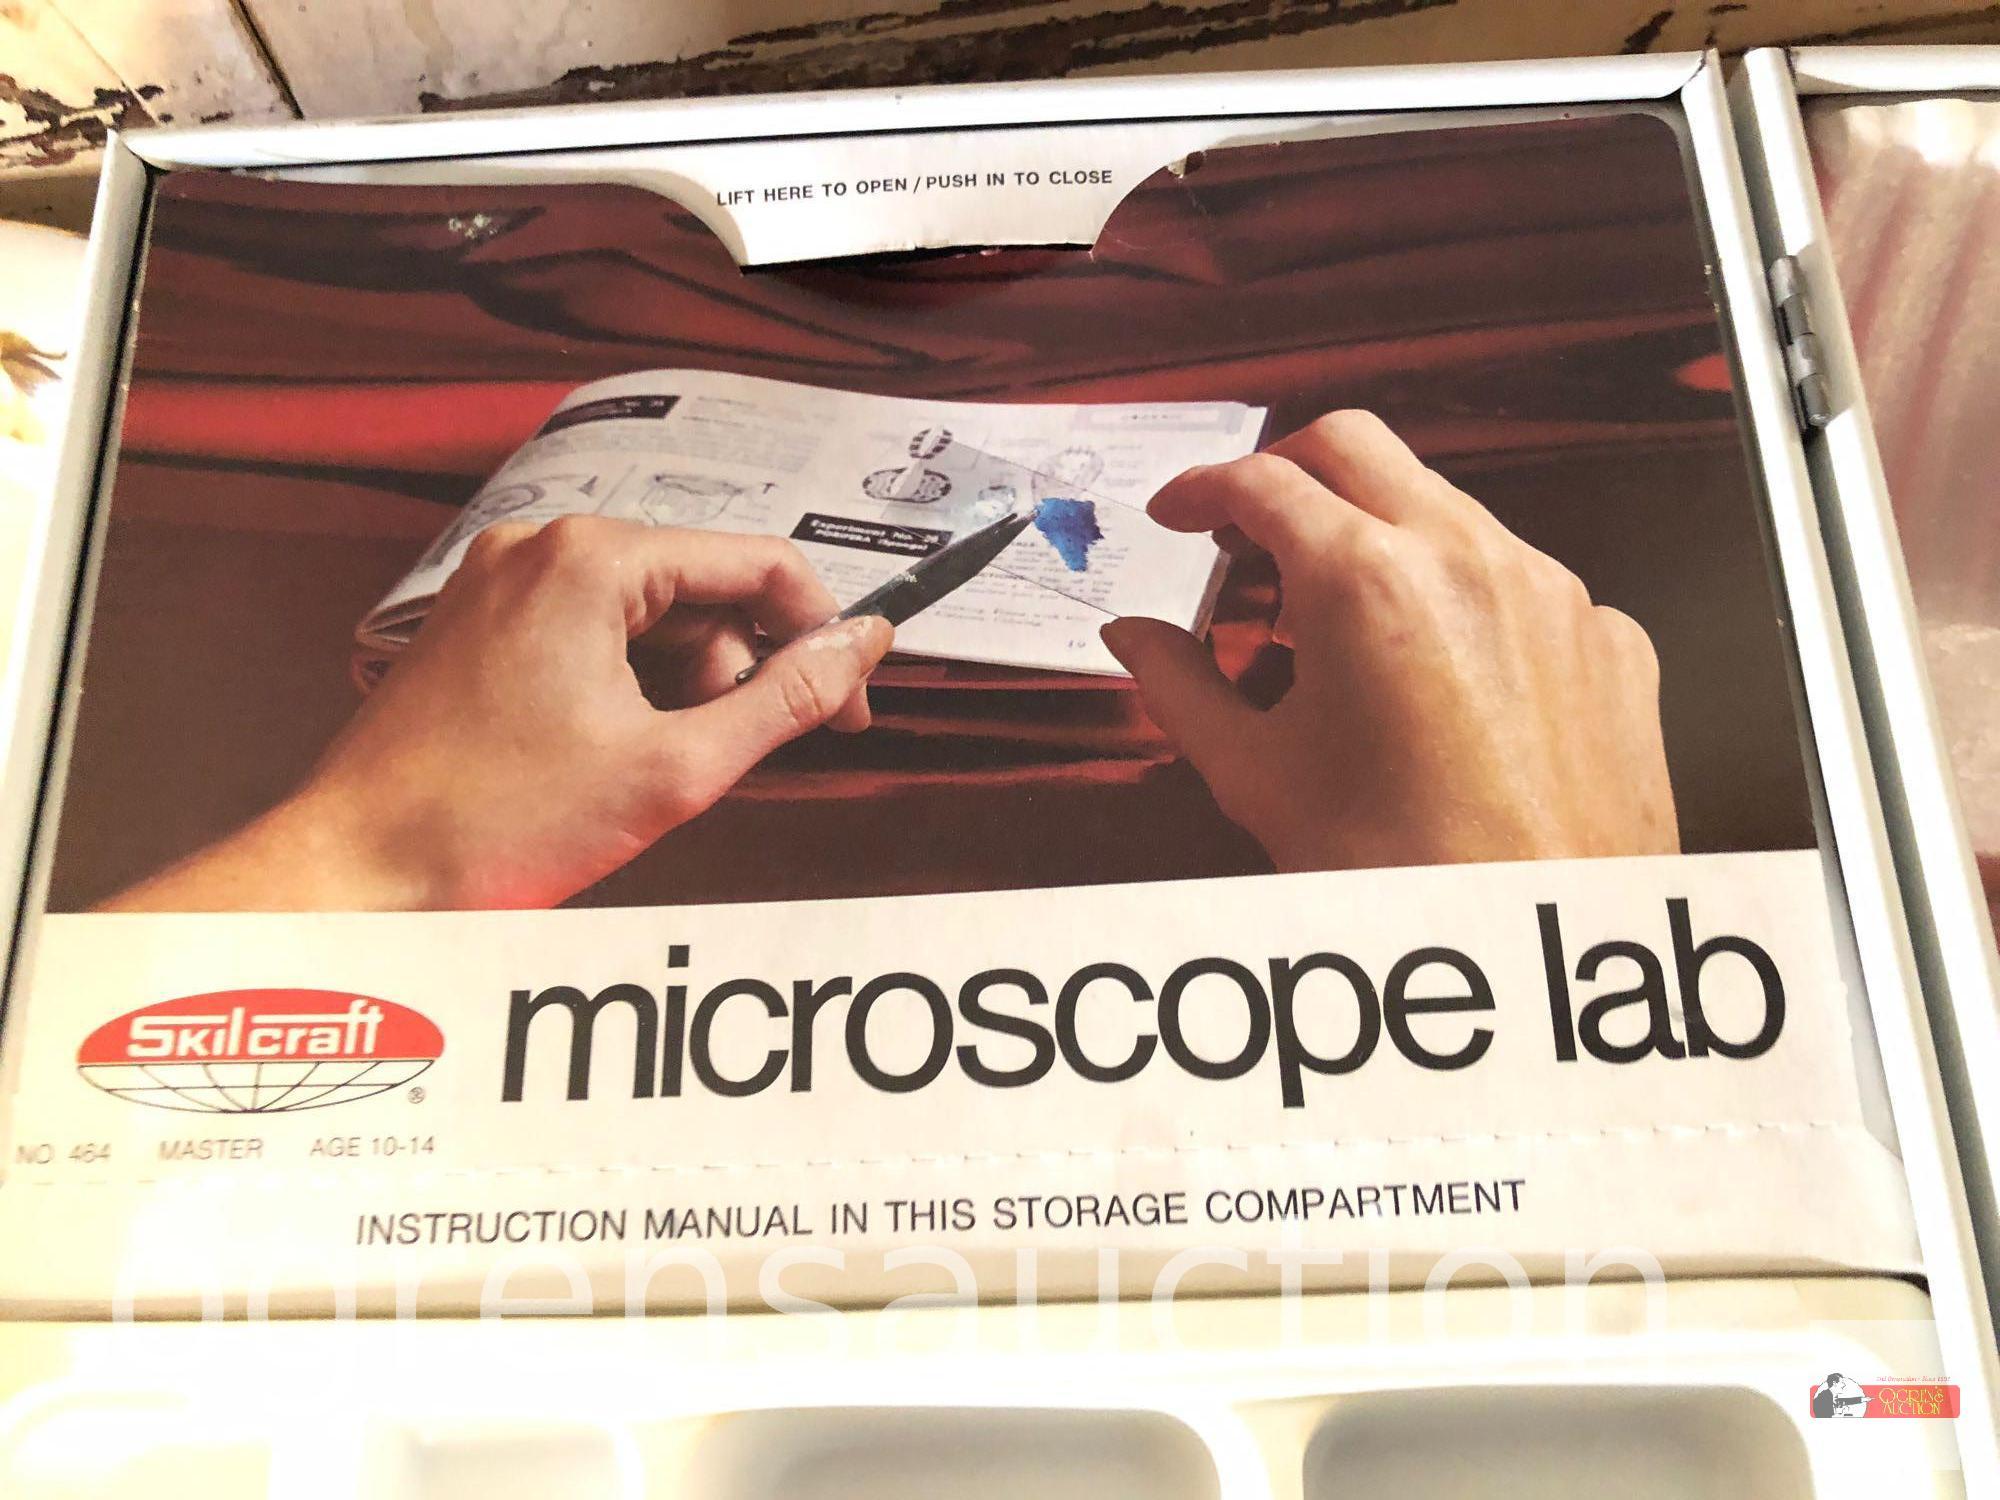 Skilcraft Science Lab microscope in carry case